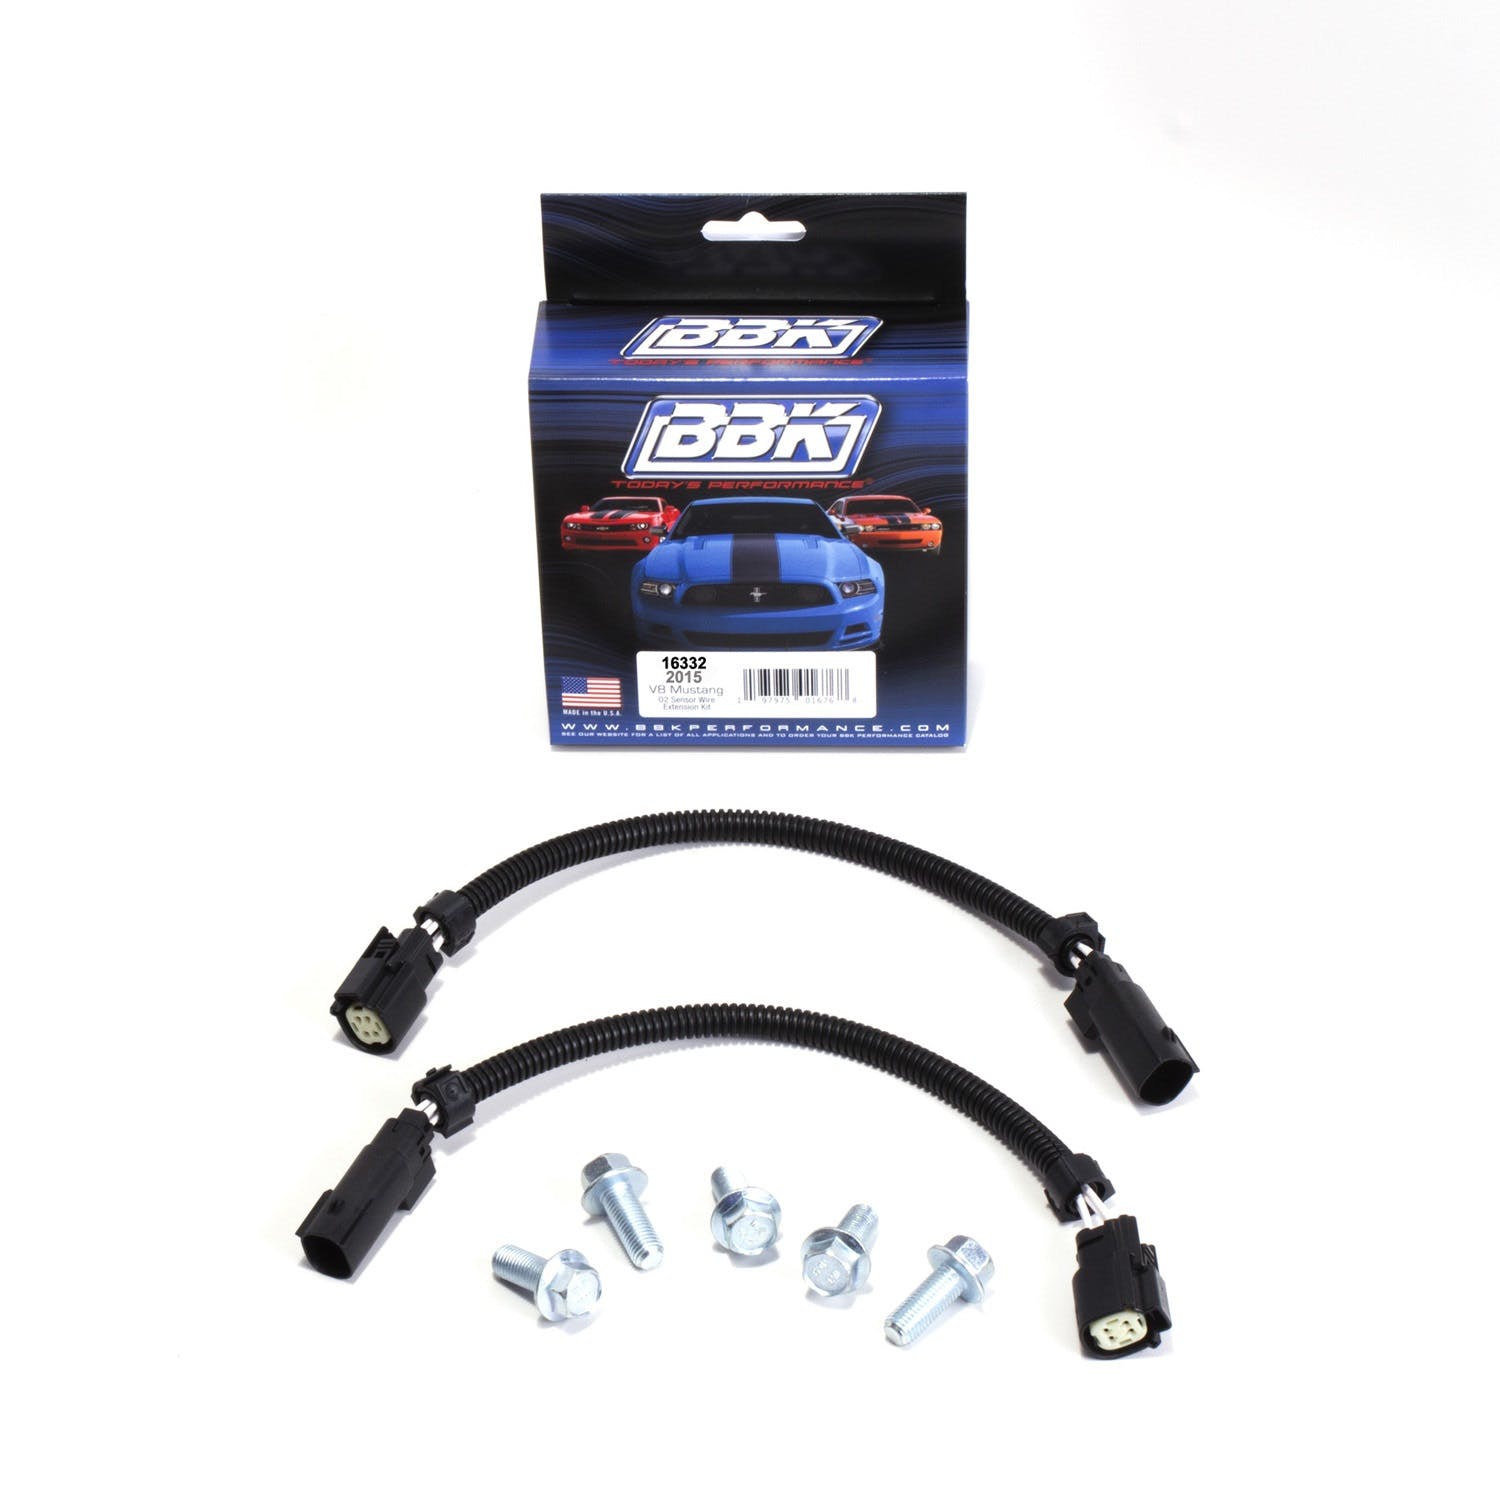 BBK Performance Parts 16332 O2 Sensor Wire Extension Harness